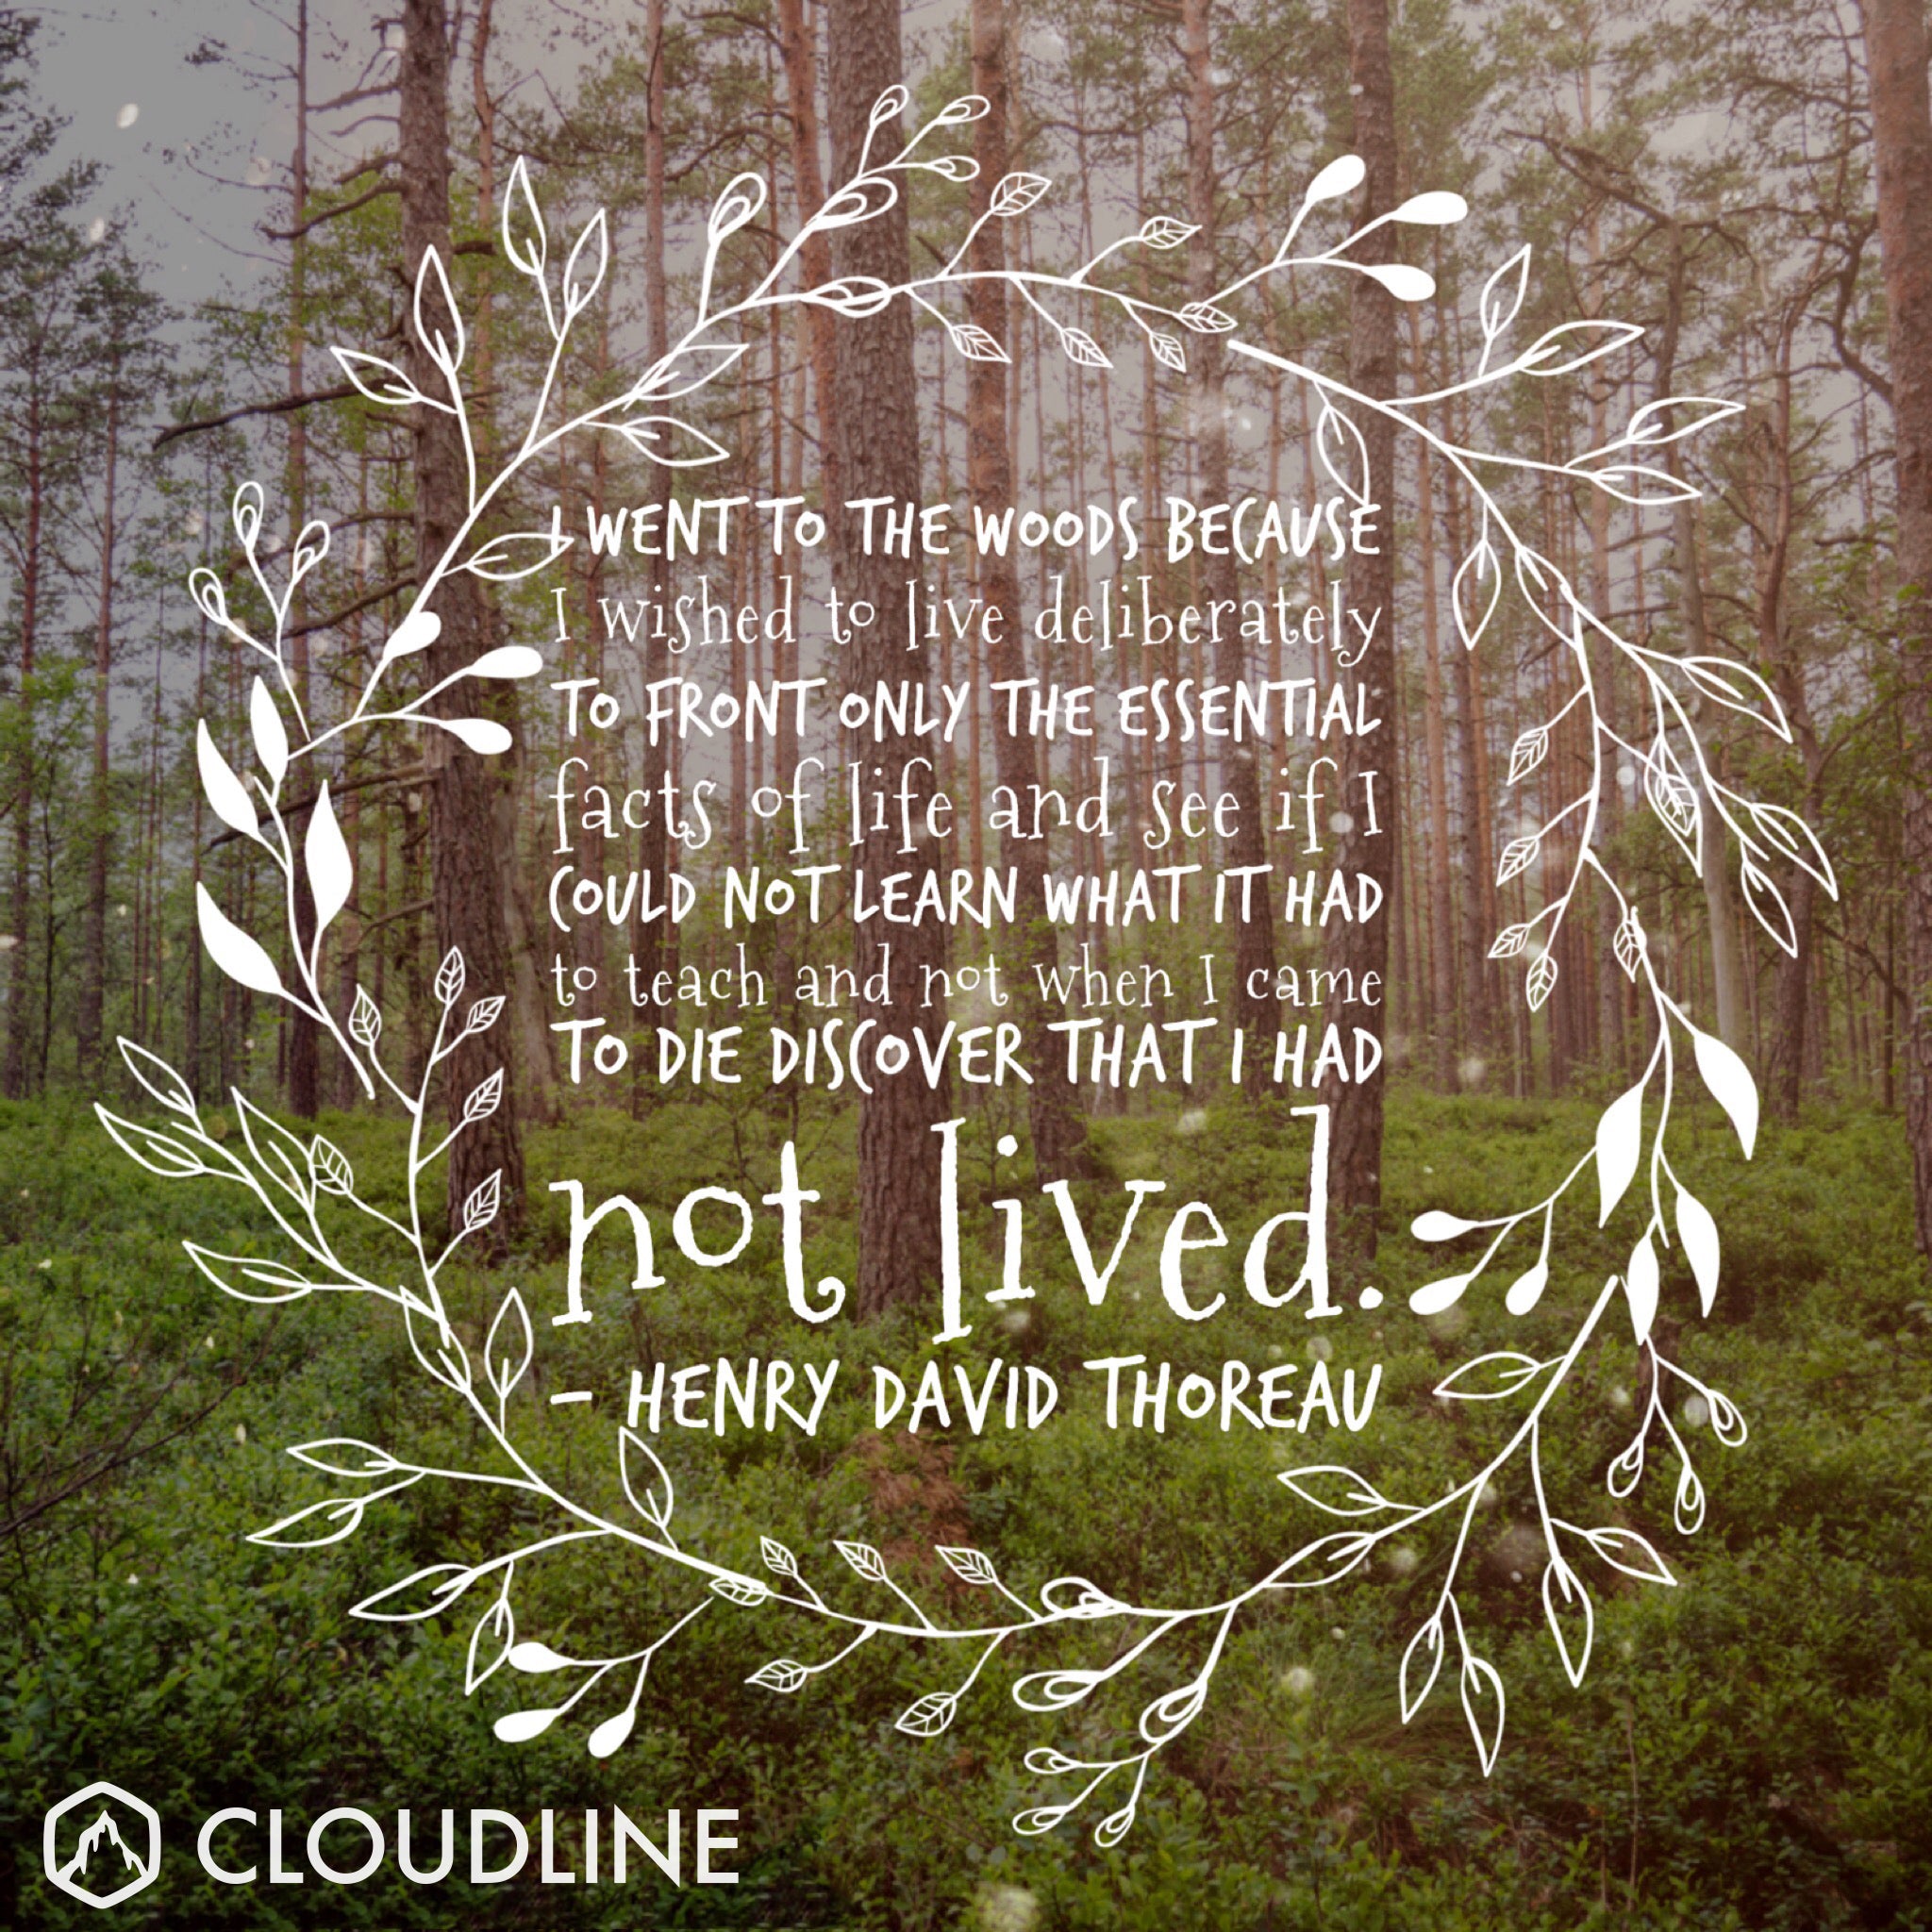 5 Quotes from Henry David Thoreau that Inspire You to Get - CloudLine Apparel